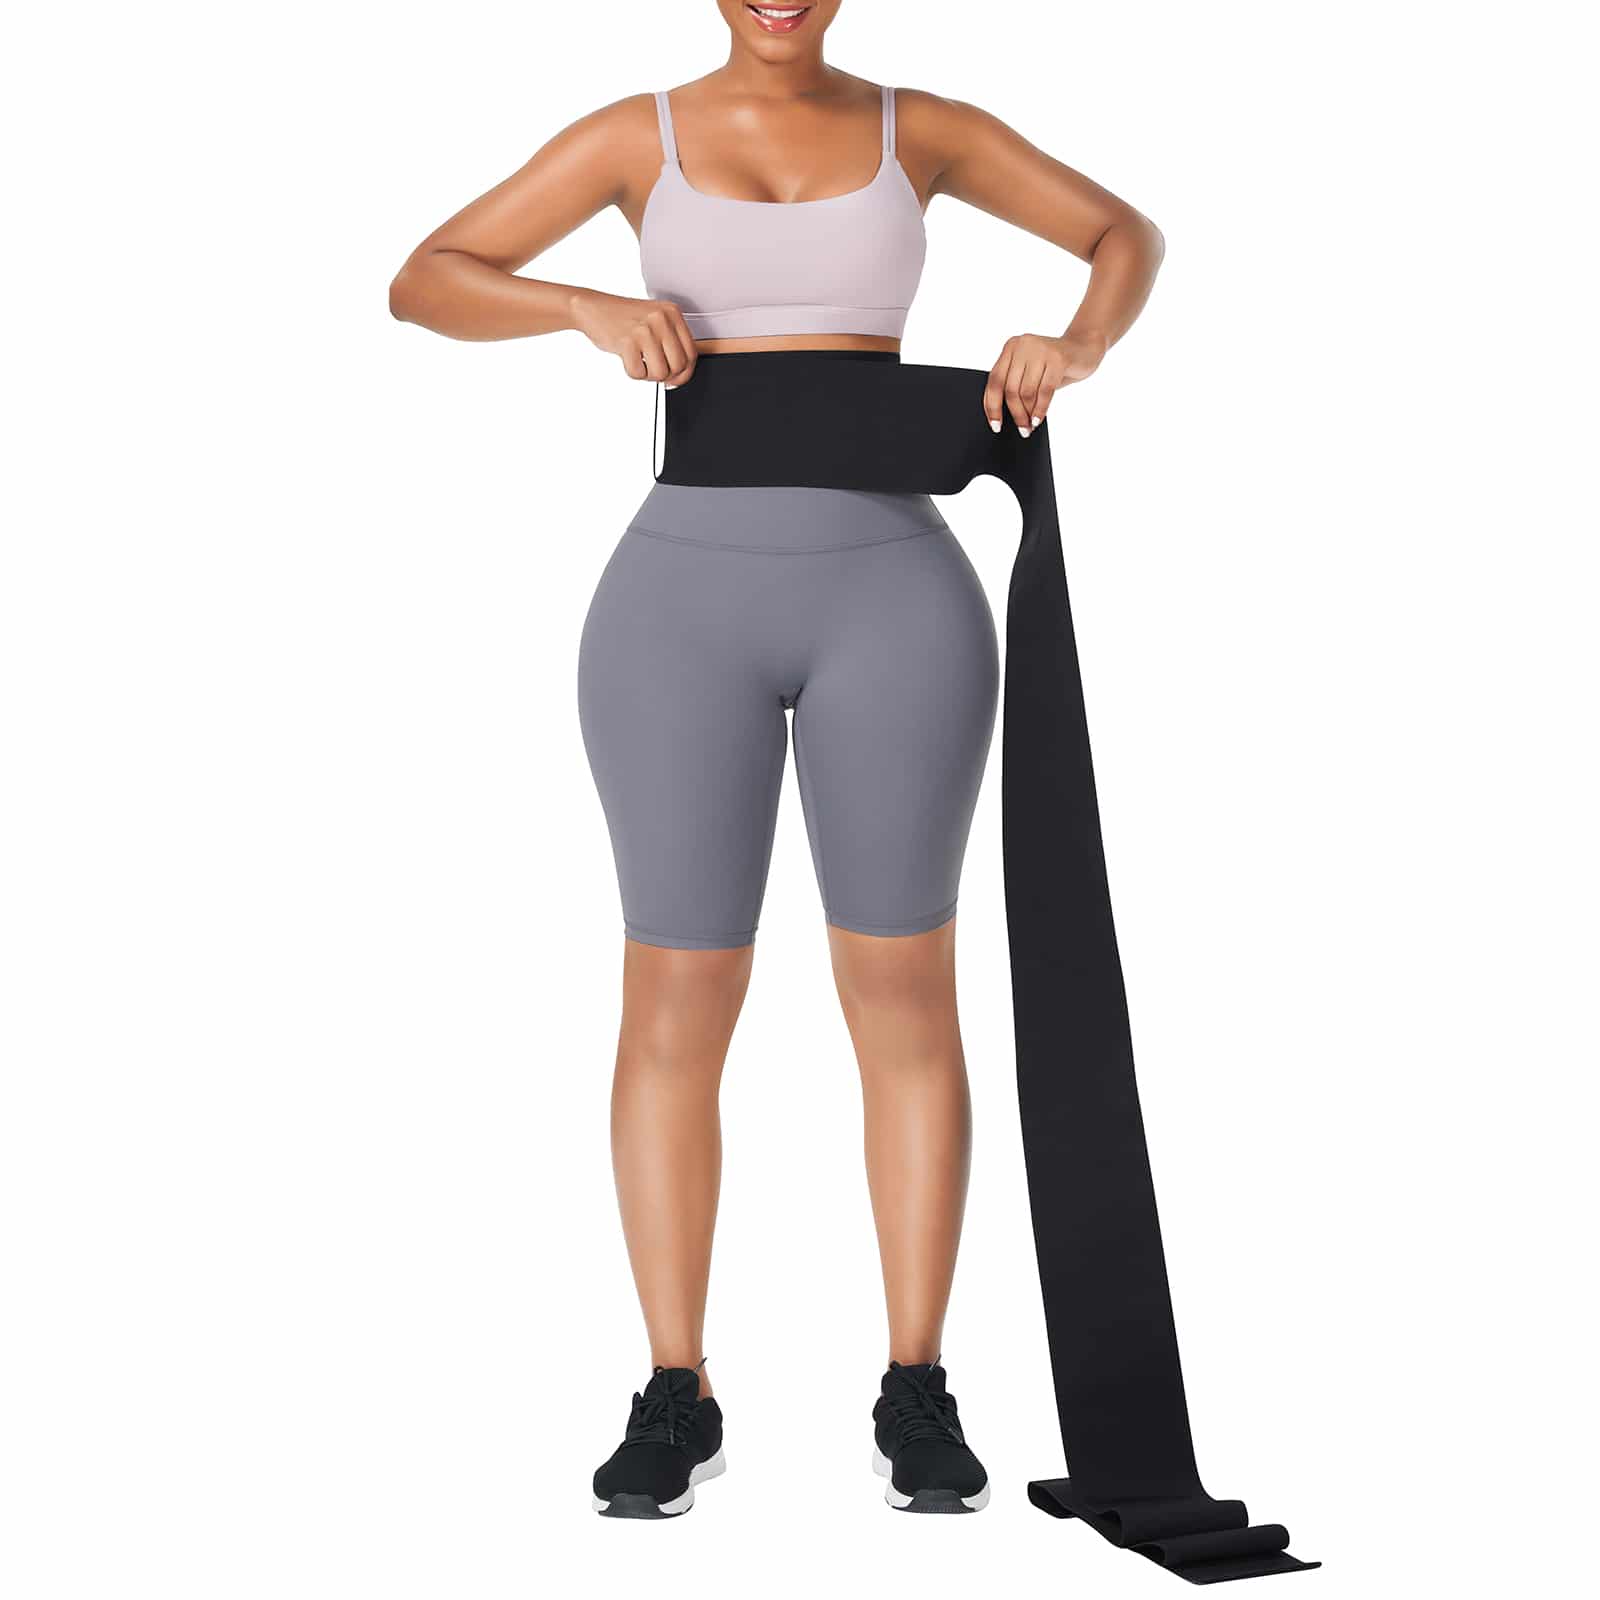 Waist Trainer Wrap with Lumbar Support - Large, Shop Today. Get it  Tomorrow!